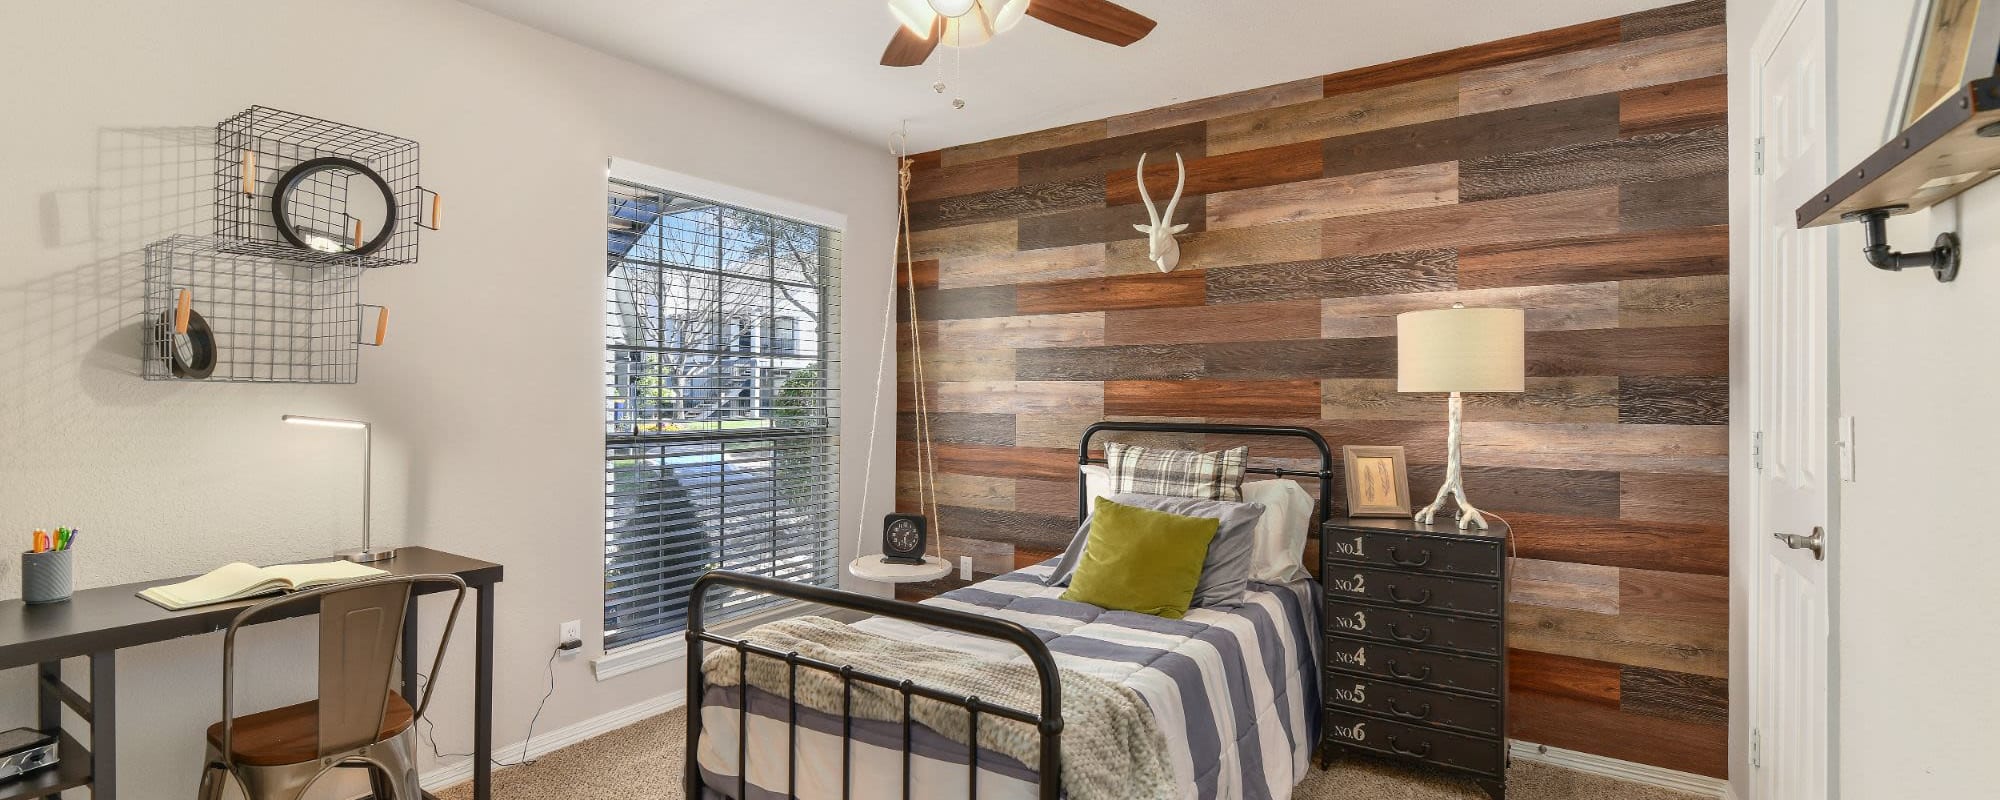 Master bedroom at The Rustic of McKinney in McKinney, Texas